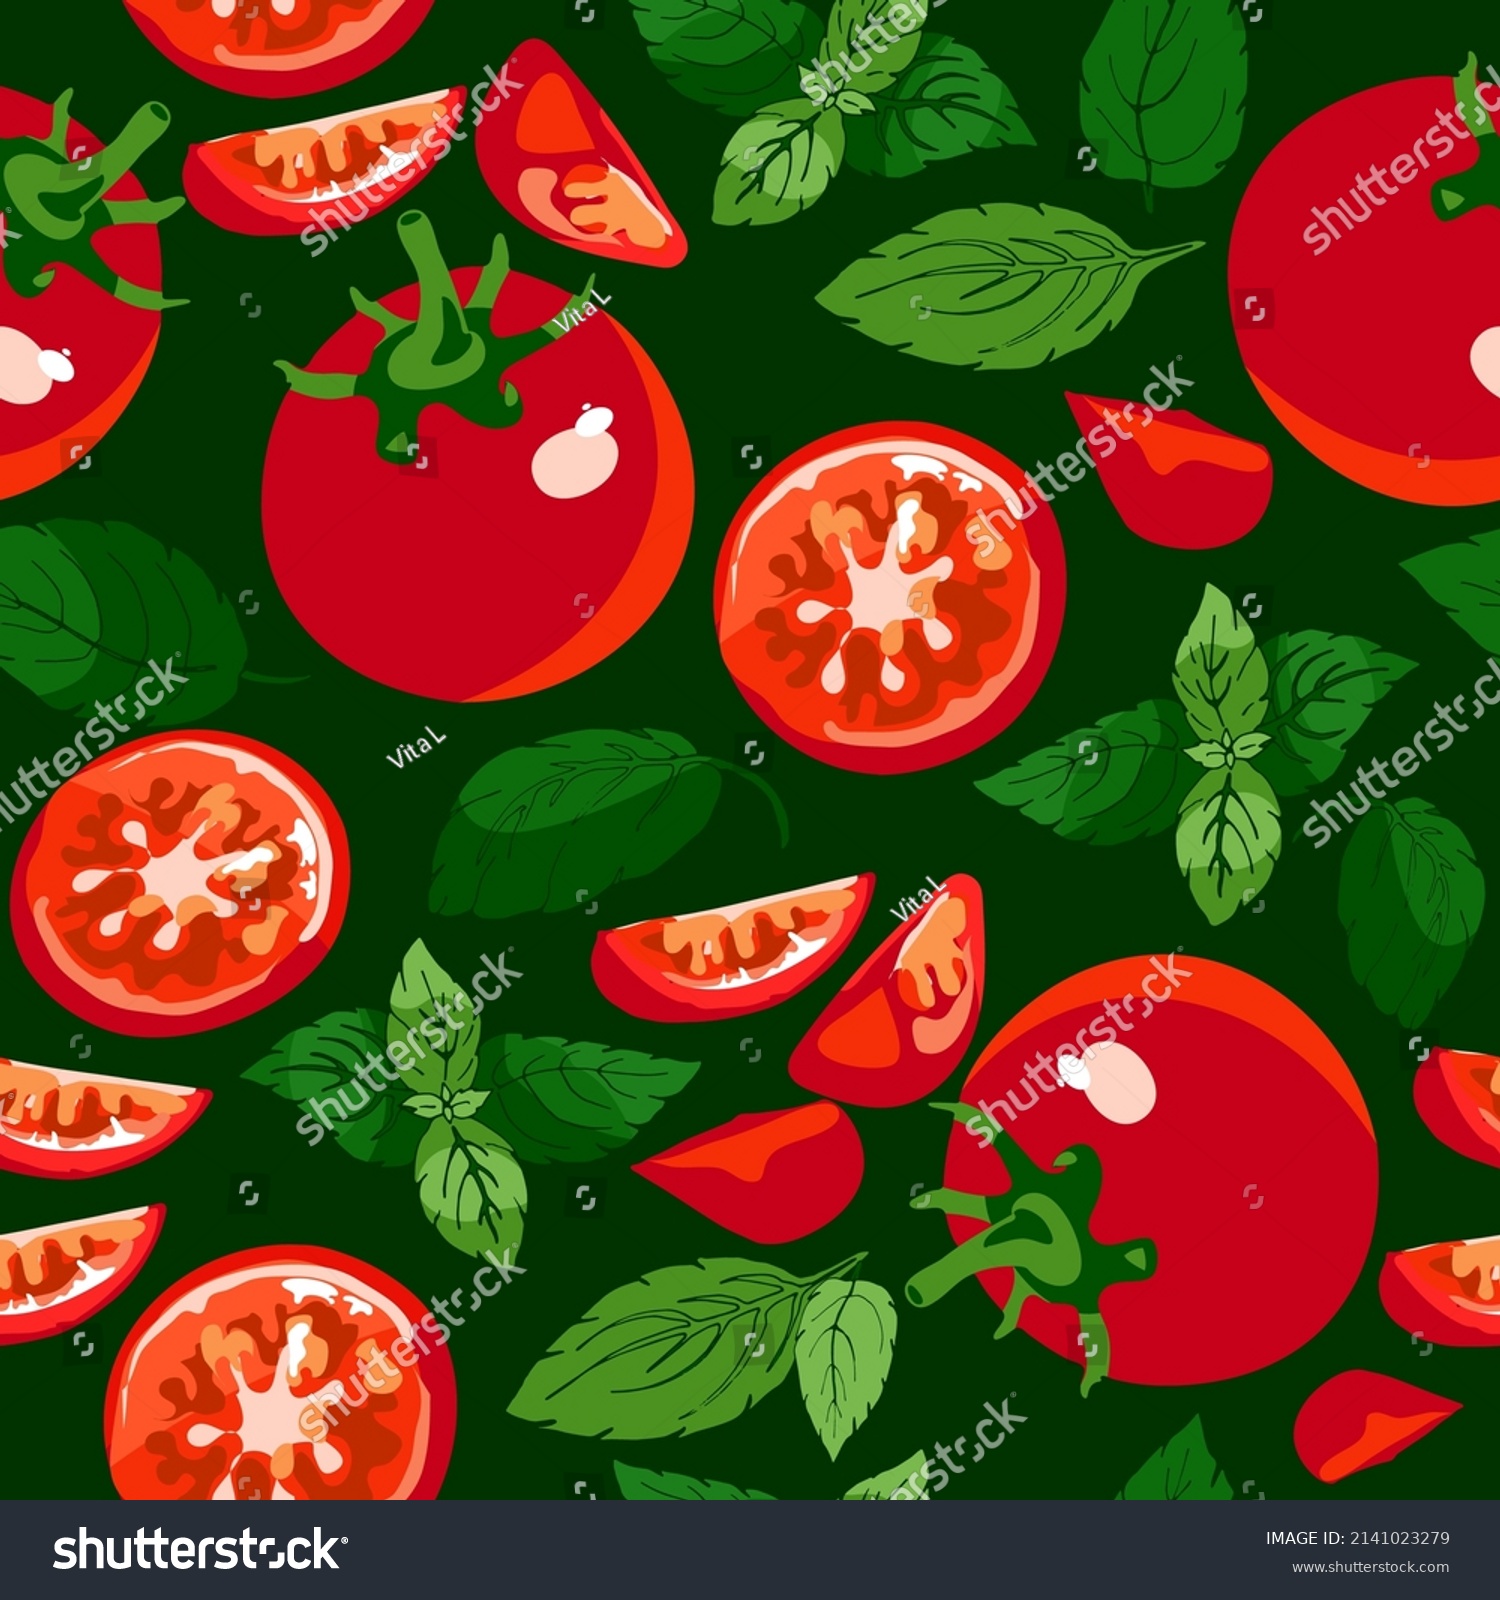 tomato, whole, slices, basil leaves on a white background, seamless pattern, #2141023279